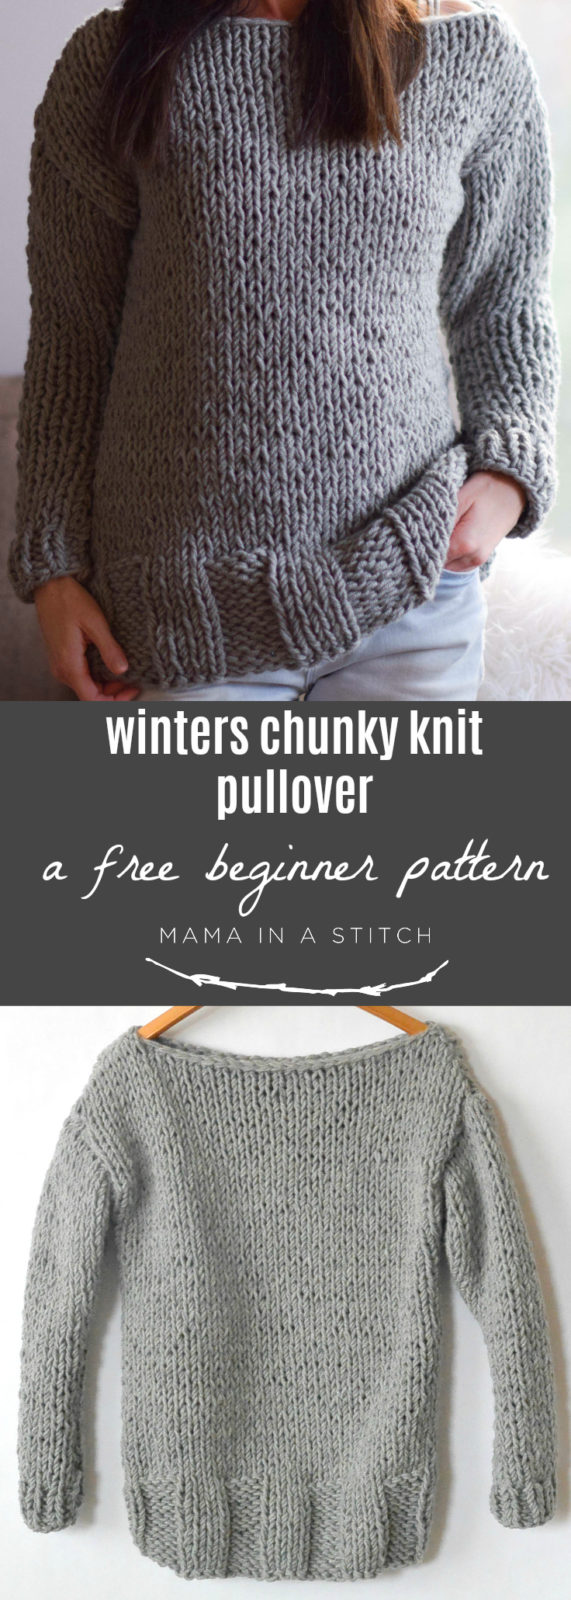 Winters Chunky Easy Knit Pullover Pattern - Mama In A Stitch